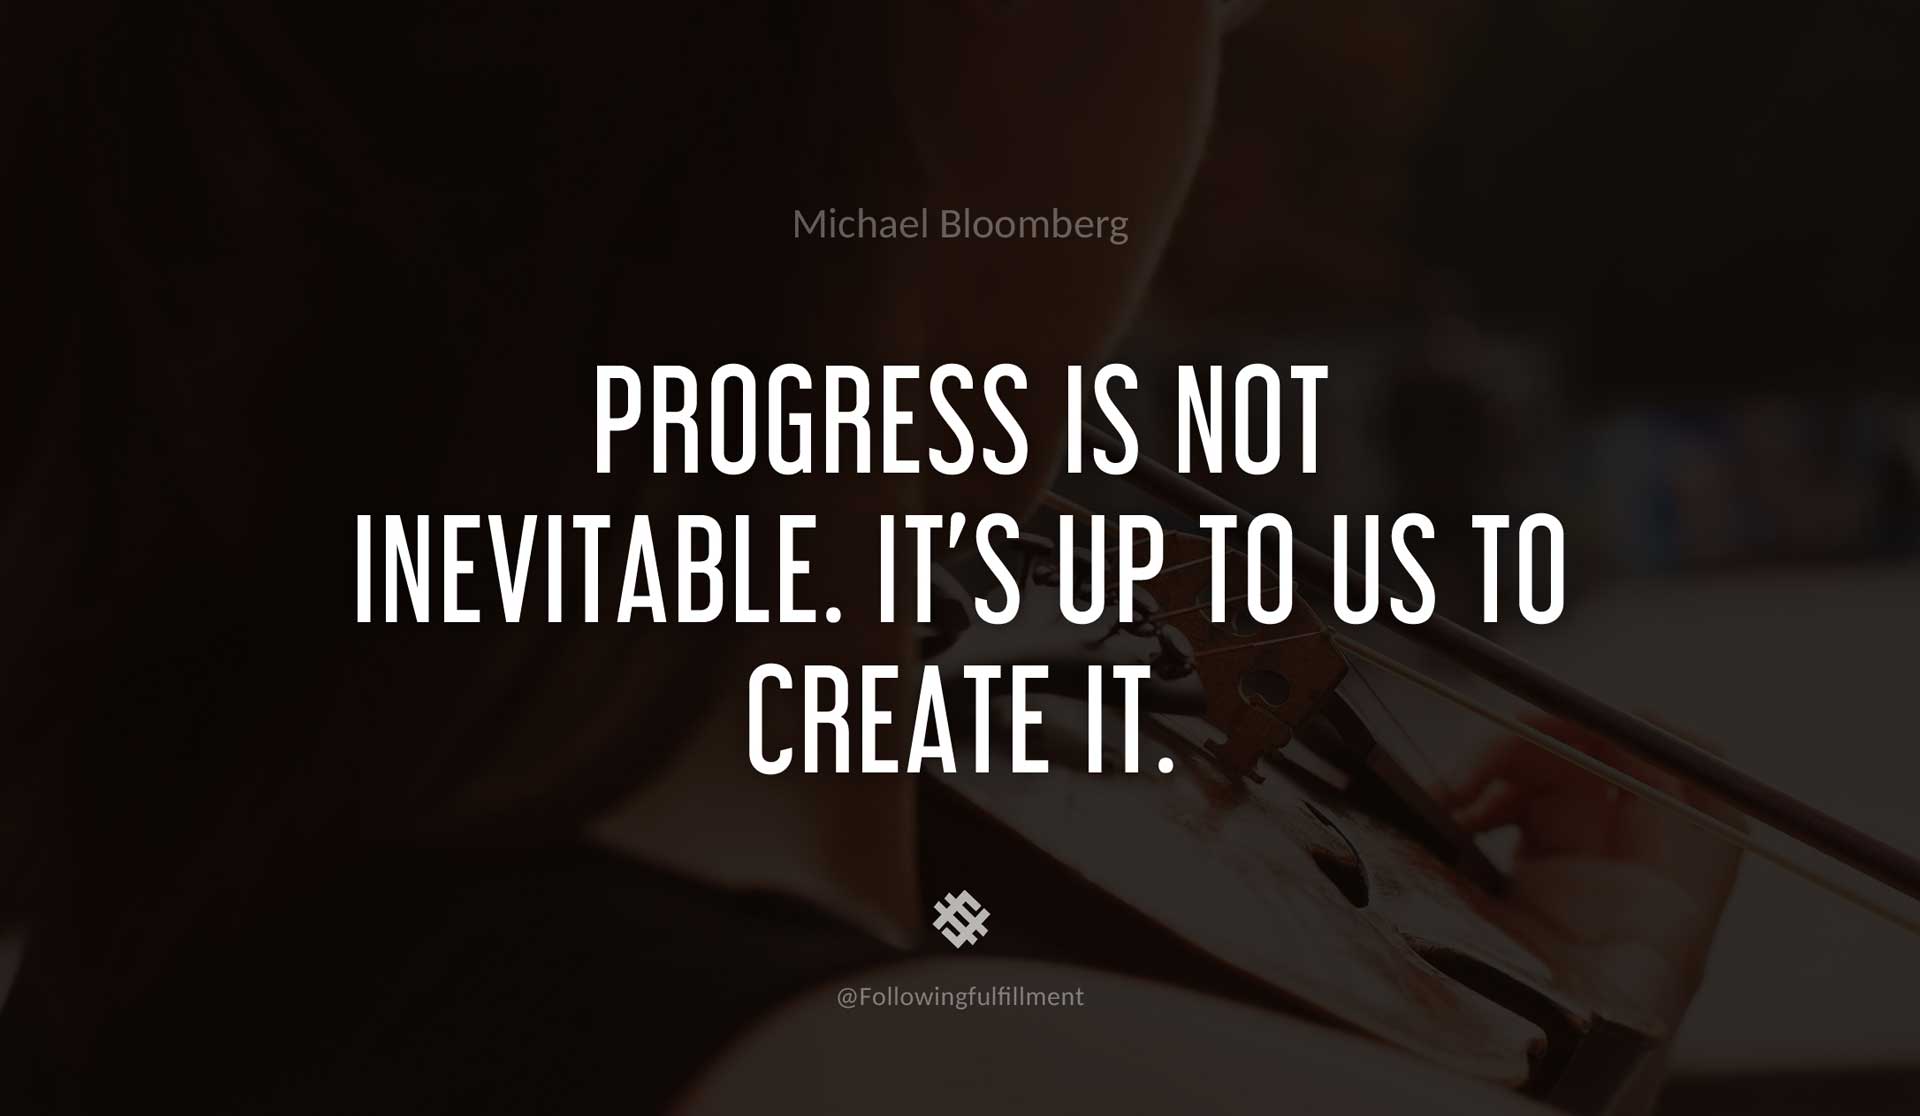 Progress-is-not-inevitable.-It's-up-to-us-to-create-it.-MICHAEL-BLOOMBERG-Quote.jpg